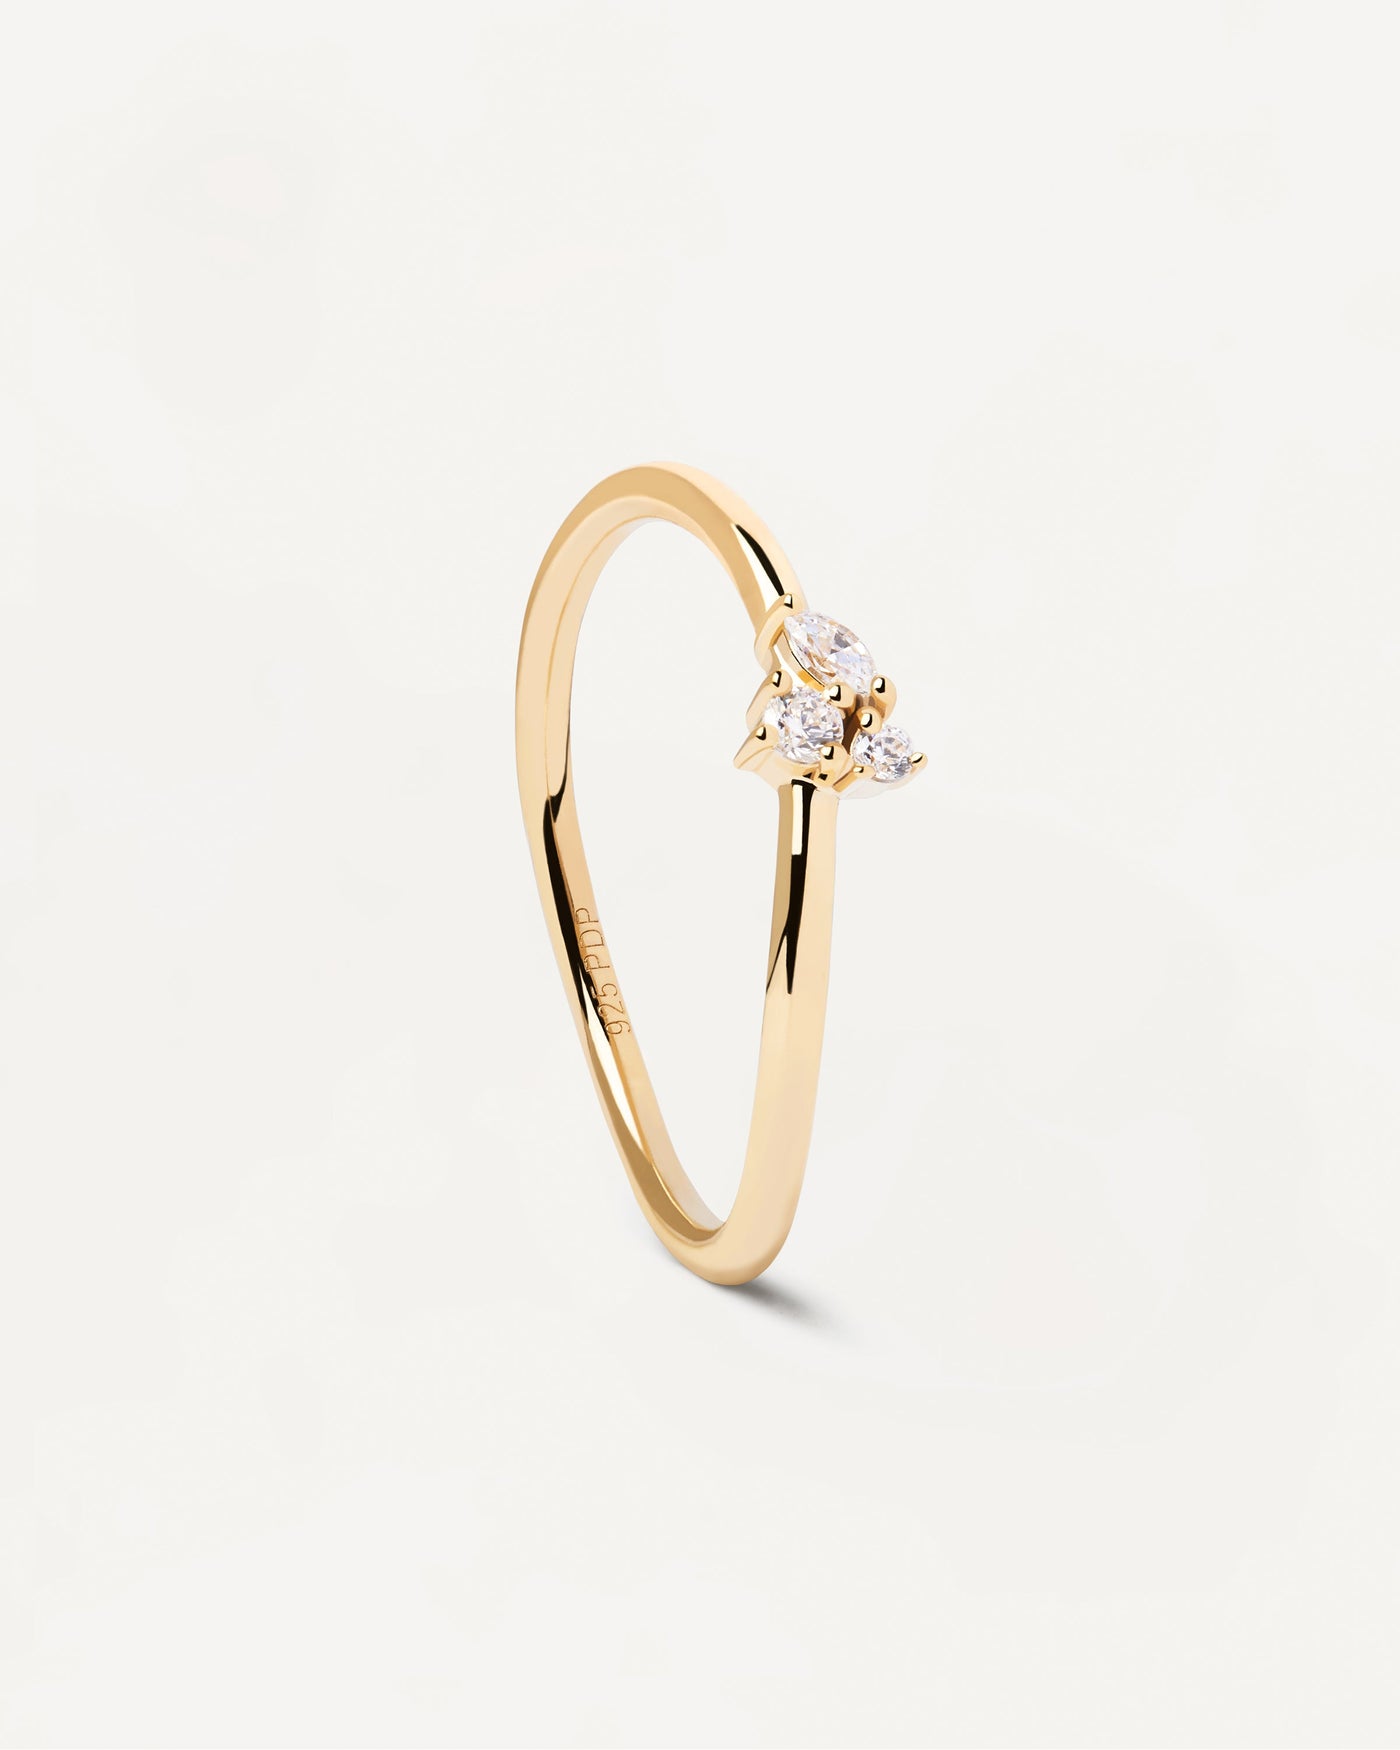 2023 Selection | Lua Ring. Gold-plated silver ring with dainty white crystals. Get the latest arrival from PDPAOLA. Place your order safely and get this Best Seller. Free Shipping.